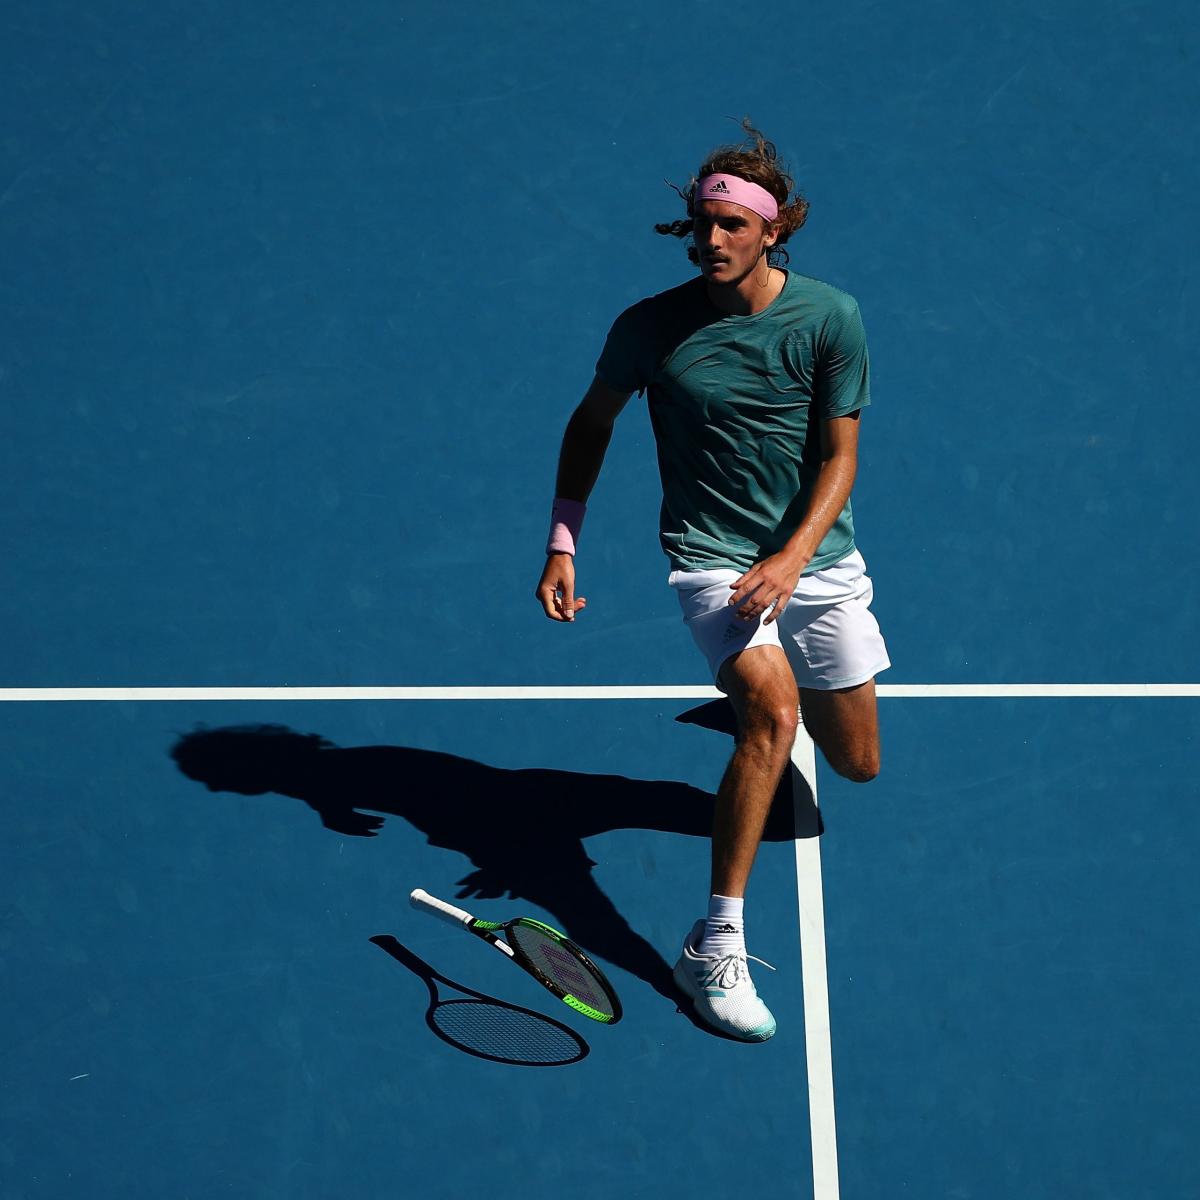 Revival Indtil nu vinter Australian Open 2019: Tuesday Replay TV Schedule, Live-Stream Guide |  Bleacher Report | Latest News, Videos and Highlights